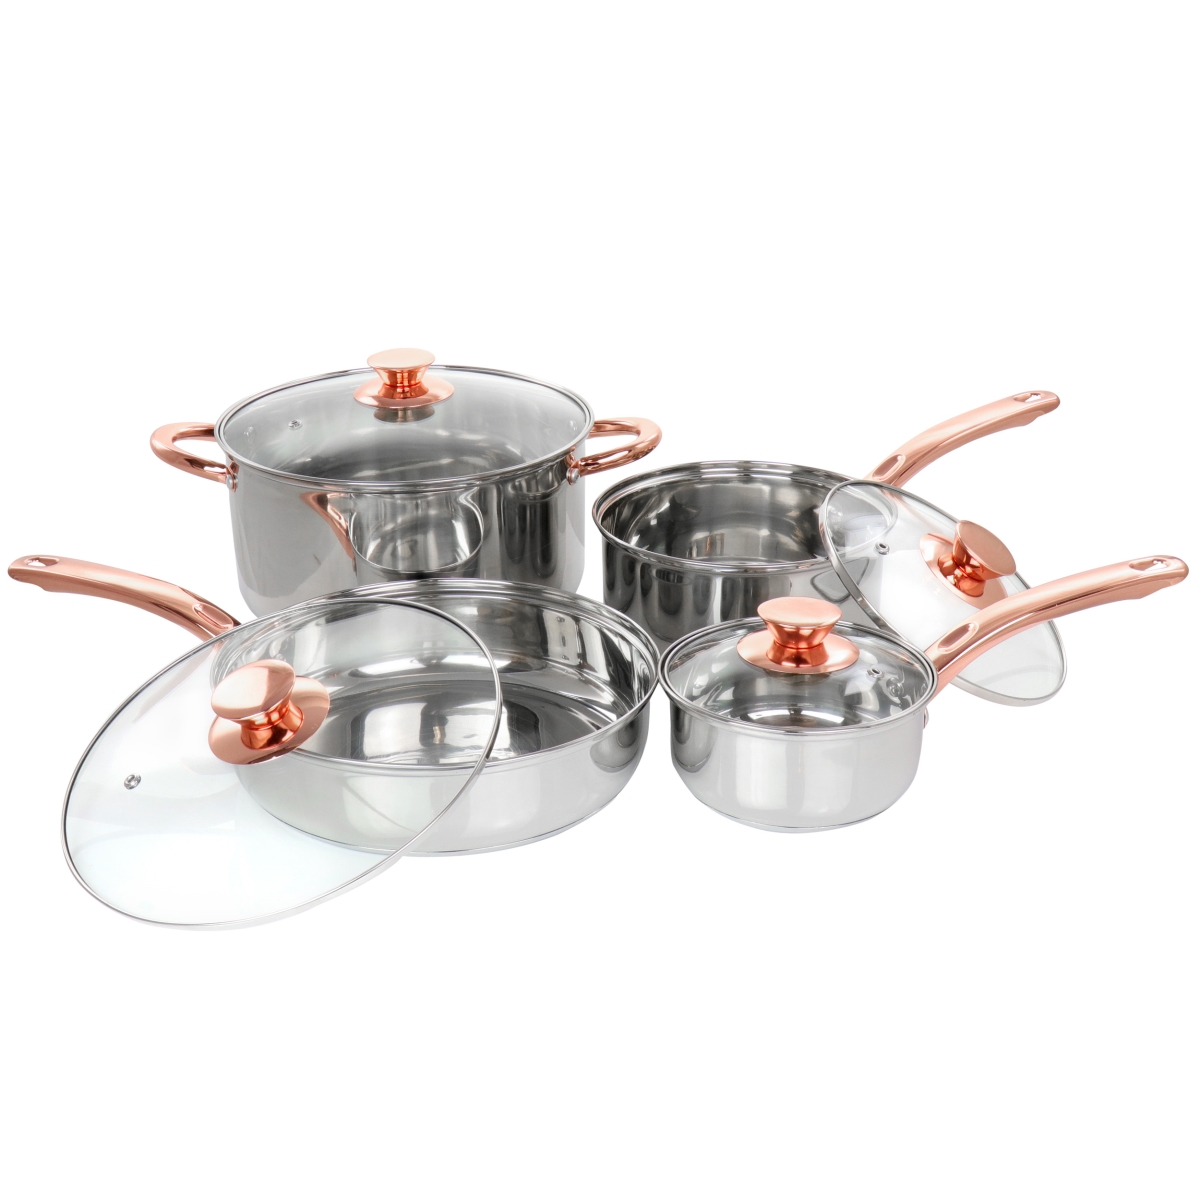 Picture of Gibson 127751.08 Ansonville Stainless Steel Cookware Set with Rose Gold Handles, 8 Piece